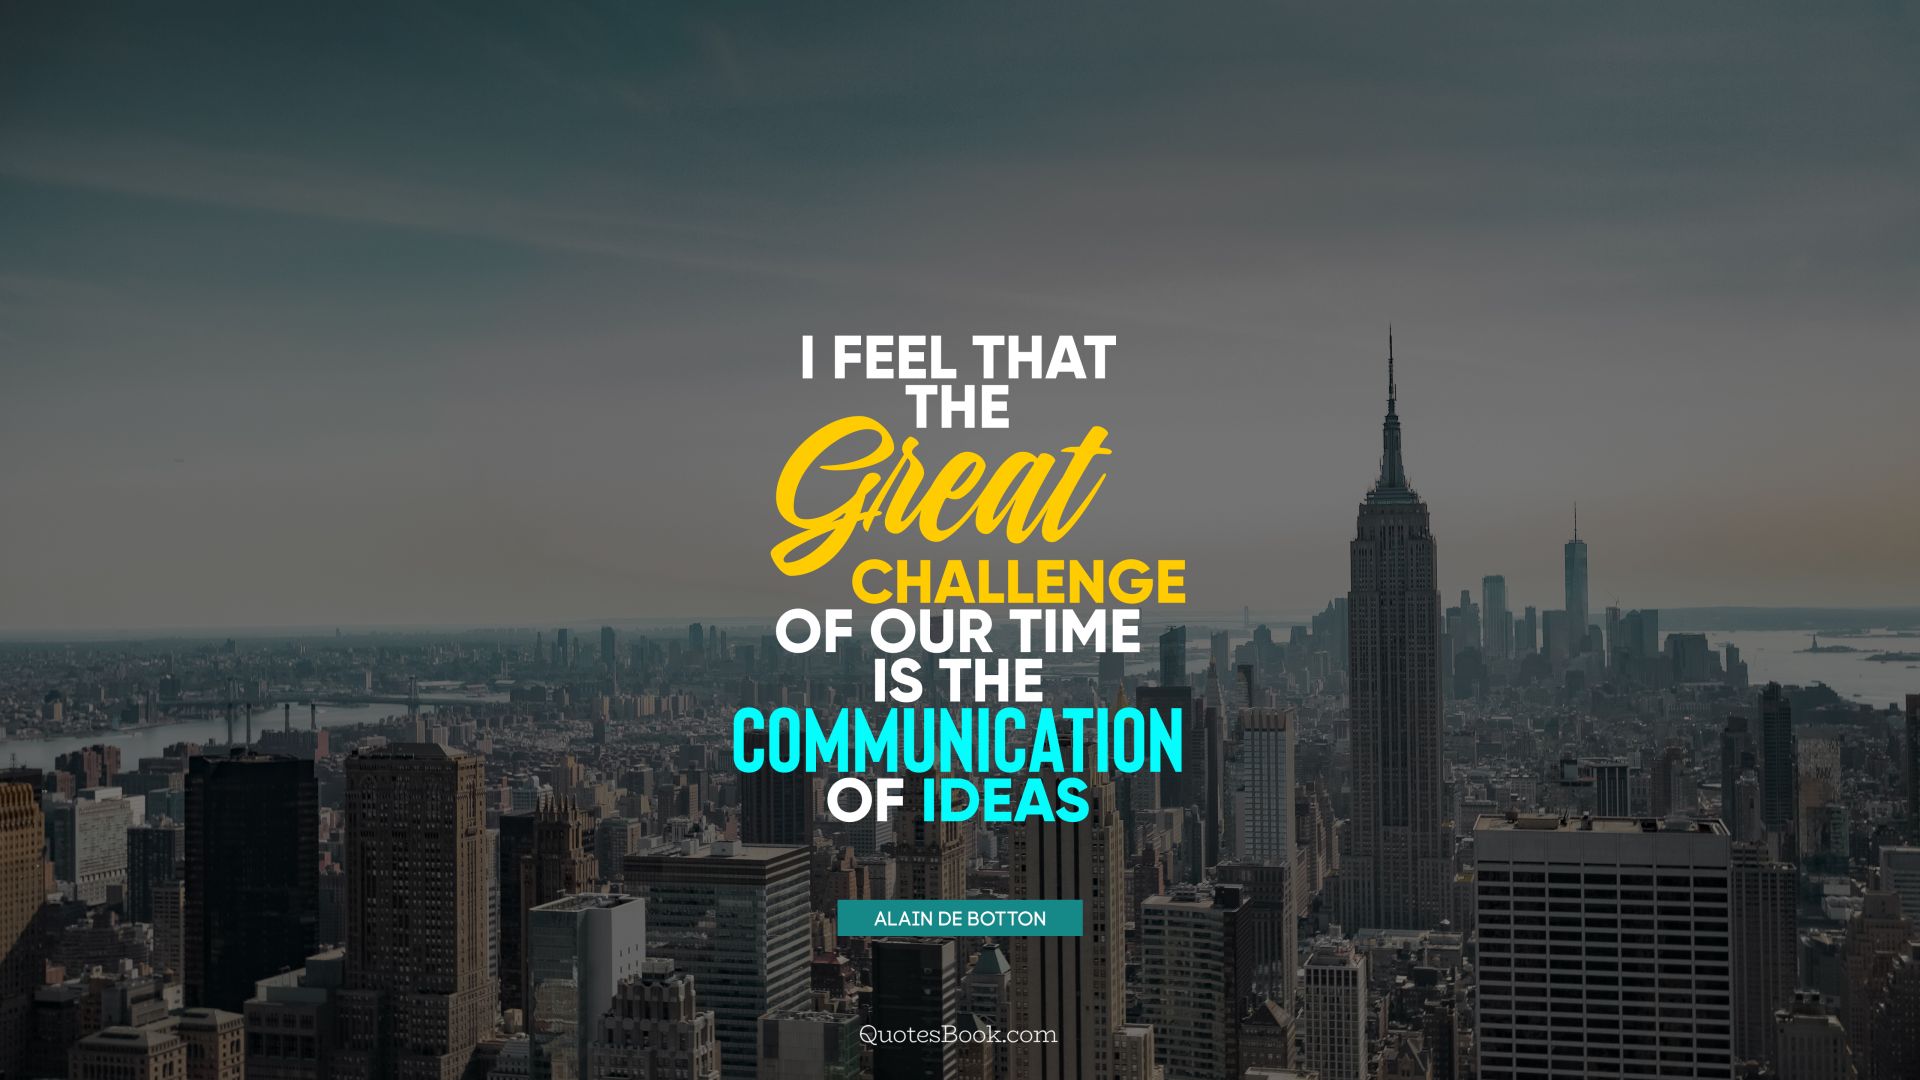 I feel that the great challenge of our time is the communication of ideas. - Quote by Alain de Botton